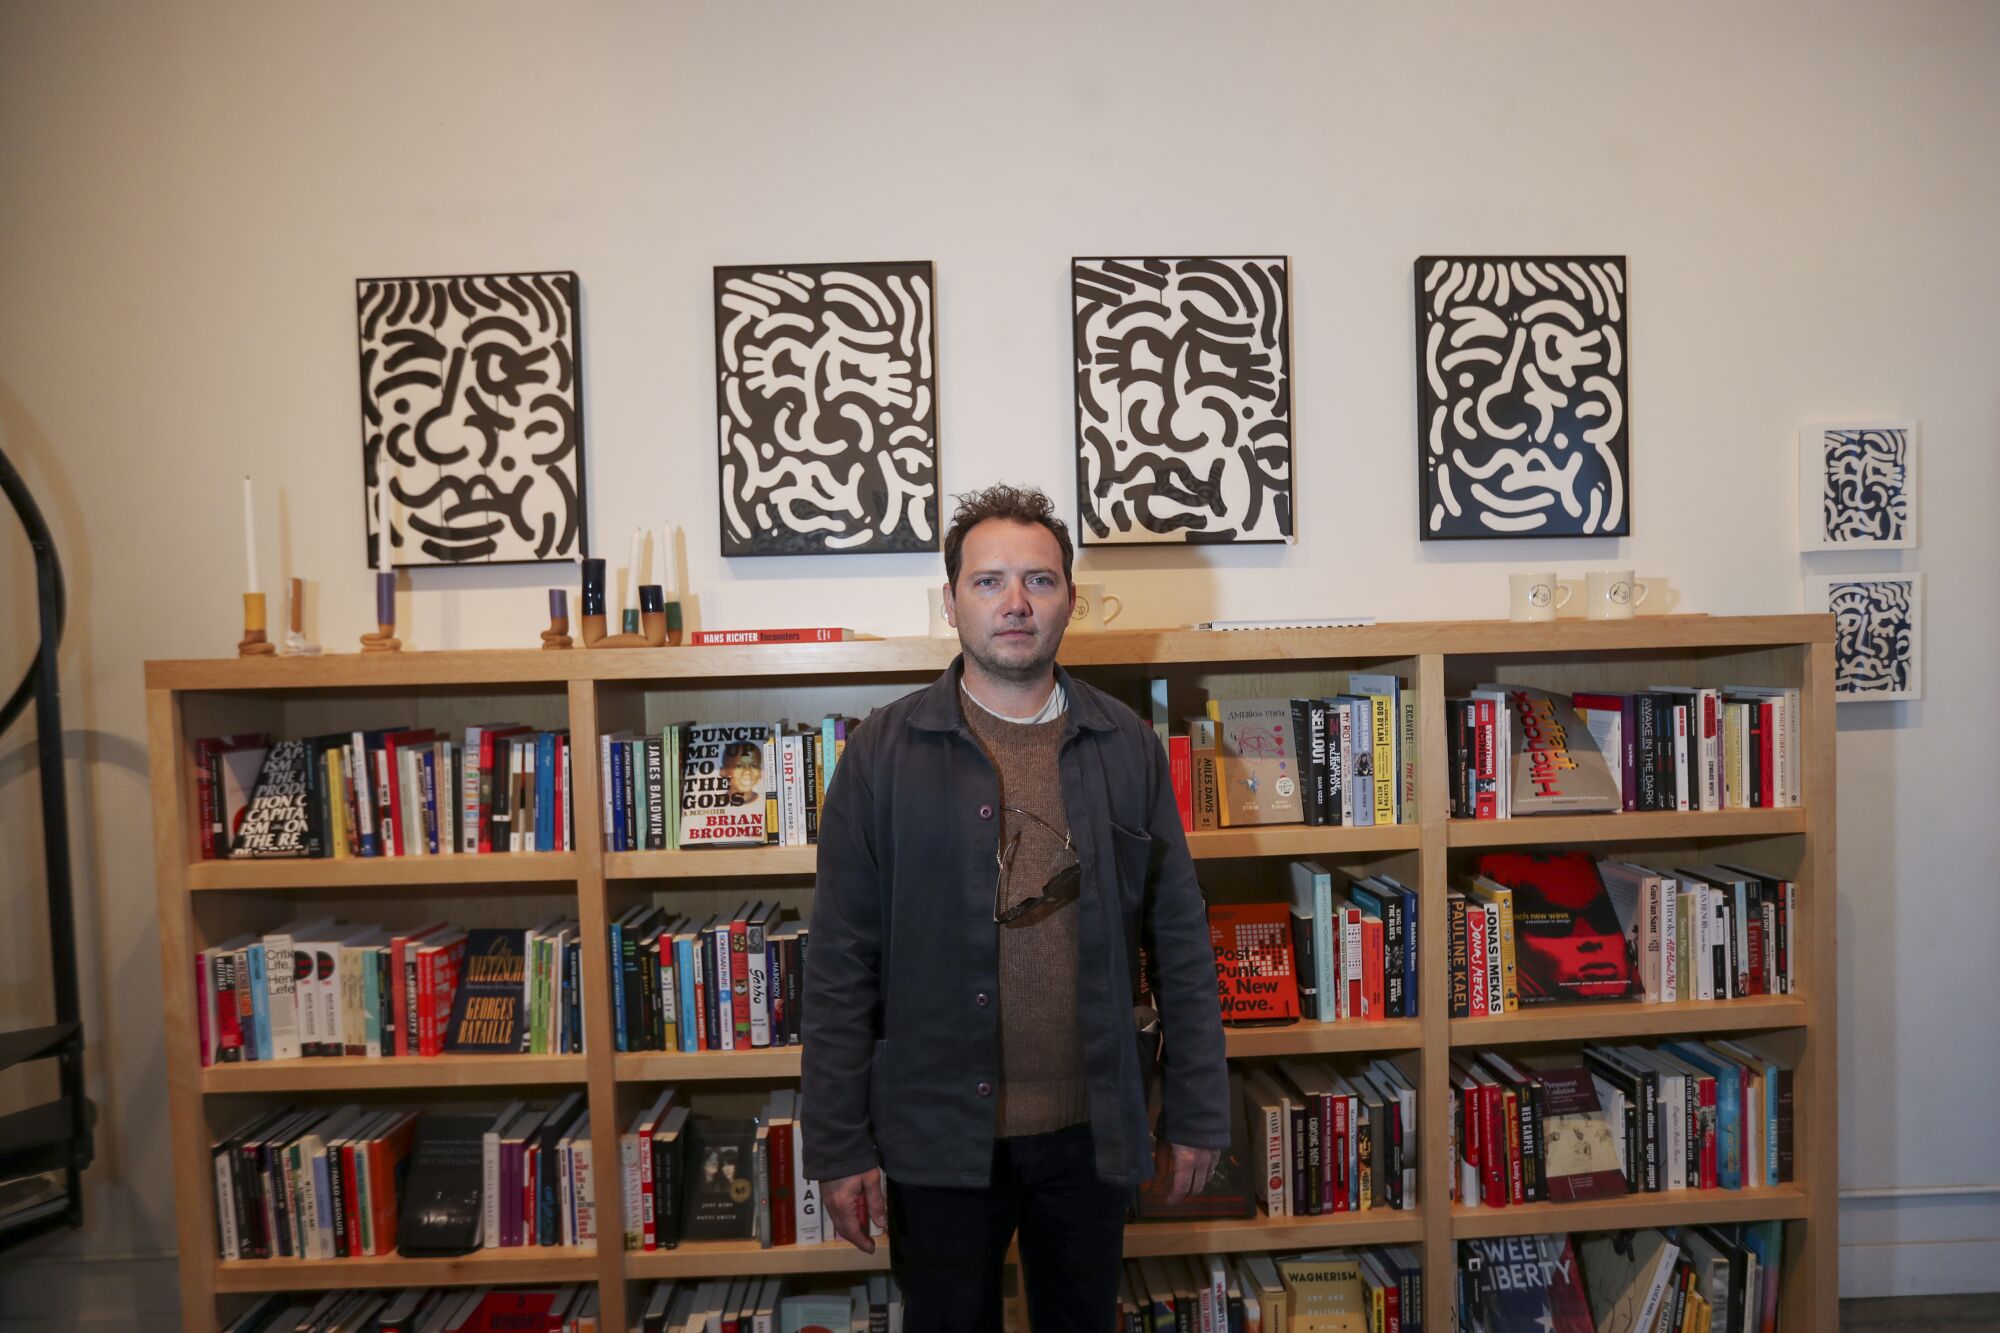 A man standing in front of bookcases and black-and-white artwork on the wall.